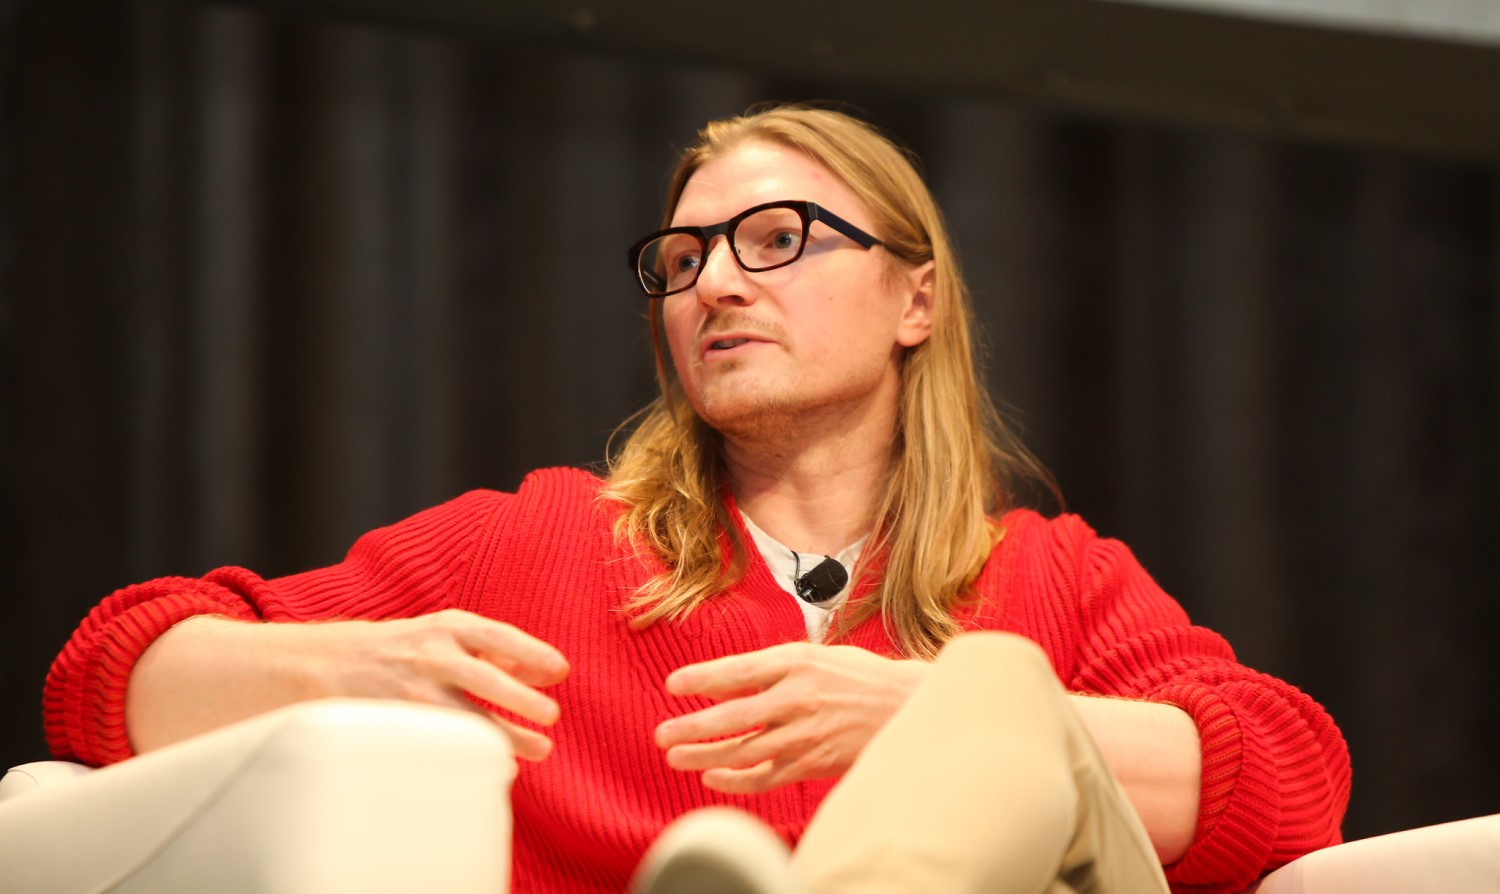 Kraken CEO Jesse Powell Issues Tough Critique of 'Reckless' DeFi Launches - CoinDesk